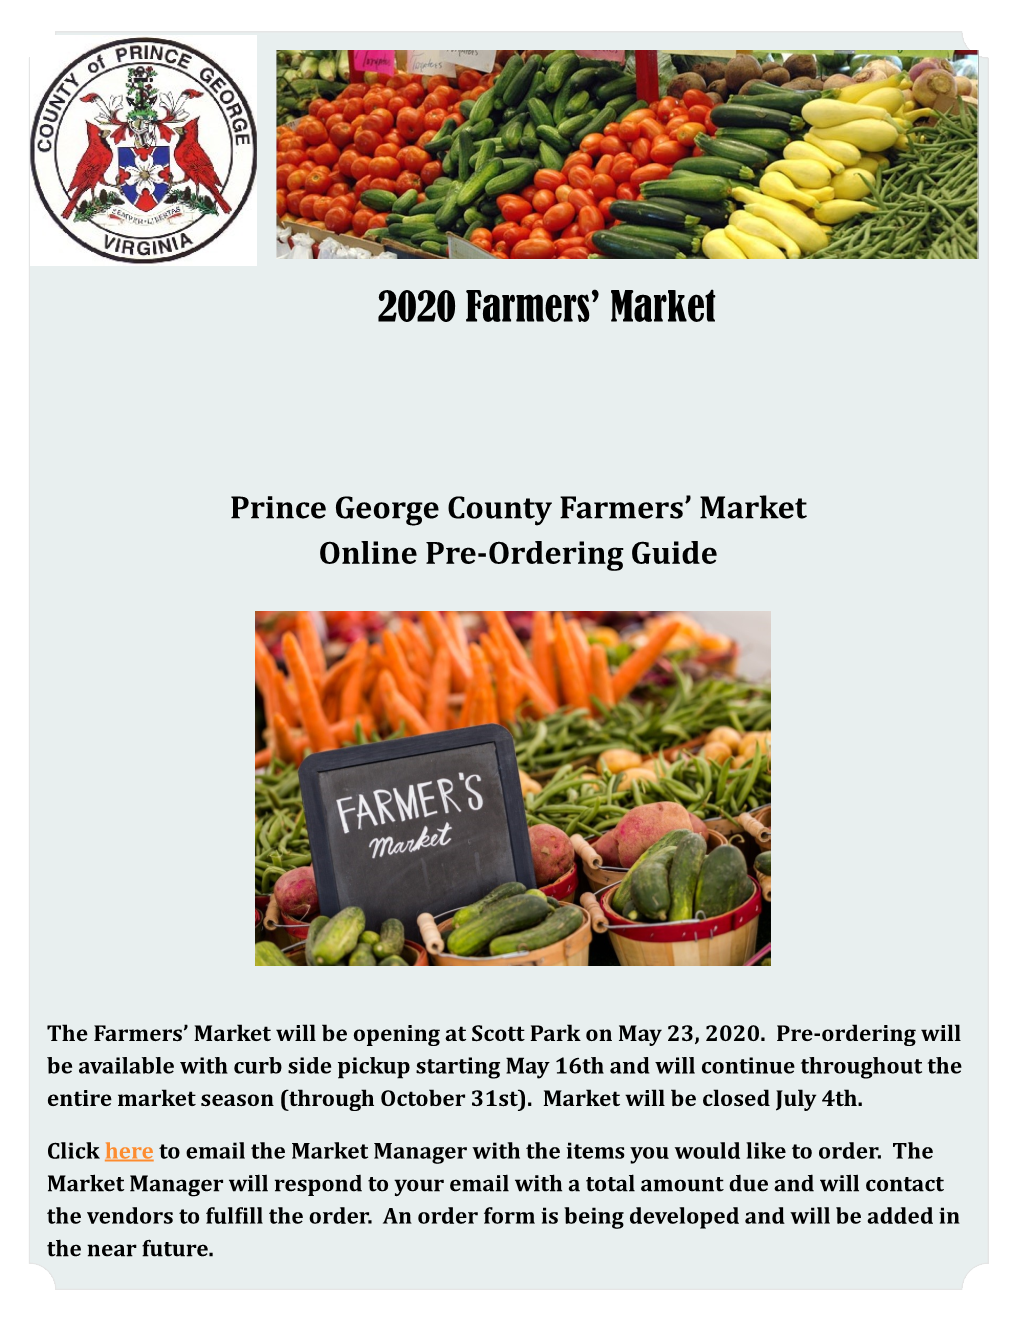 Prince George County Farmers' Market Online Pre-Ordering Guide